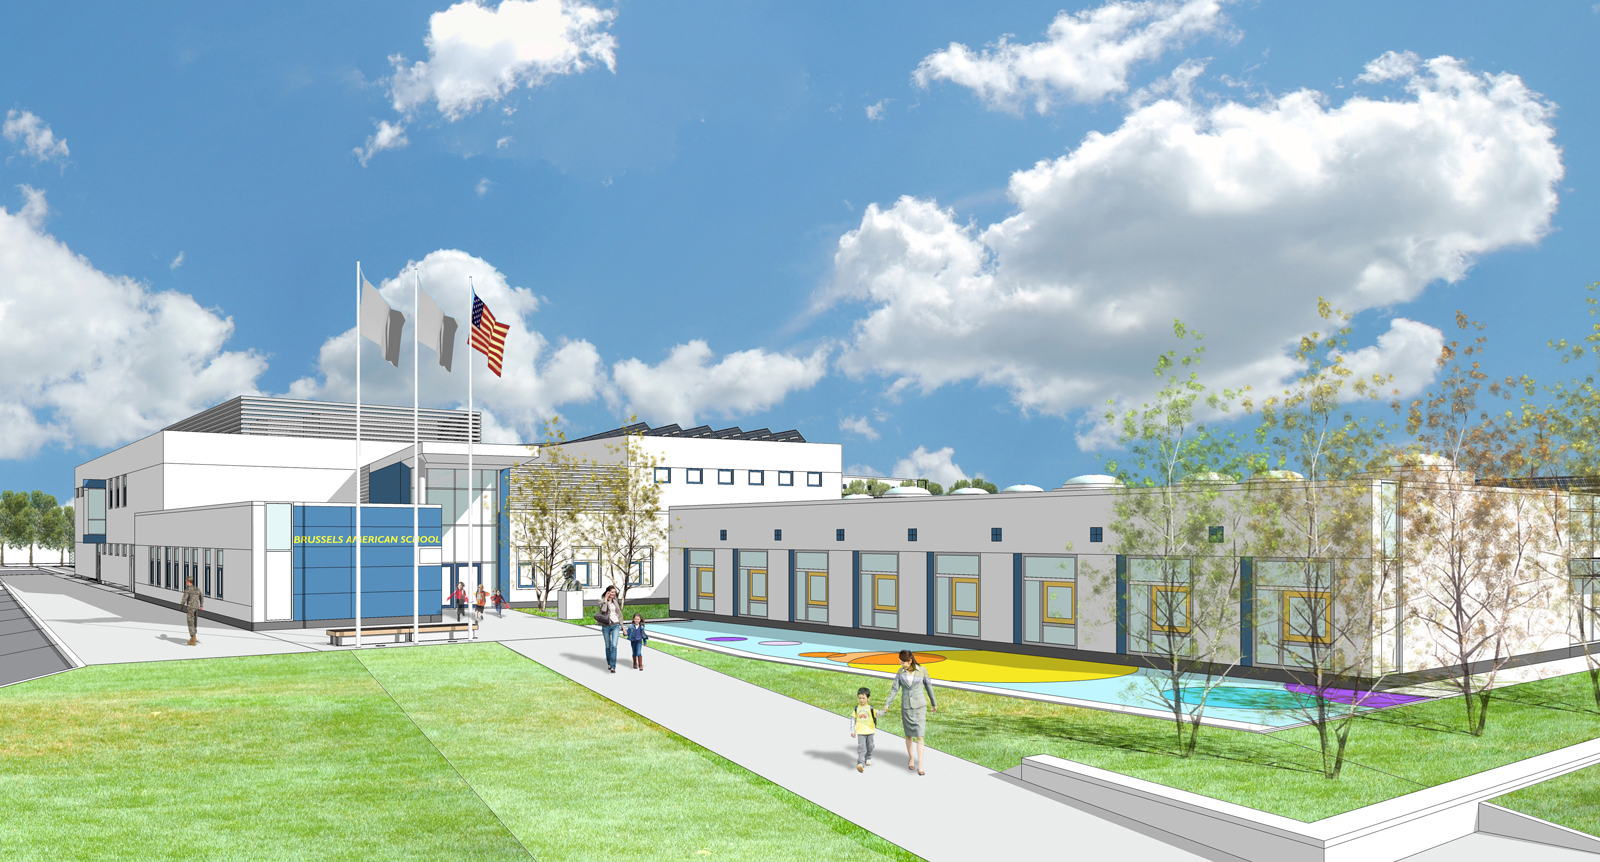 Brussels American School Design Commissioning Services